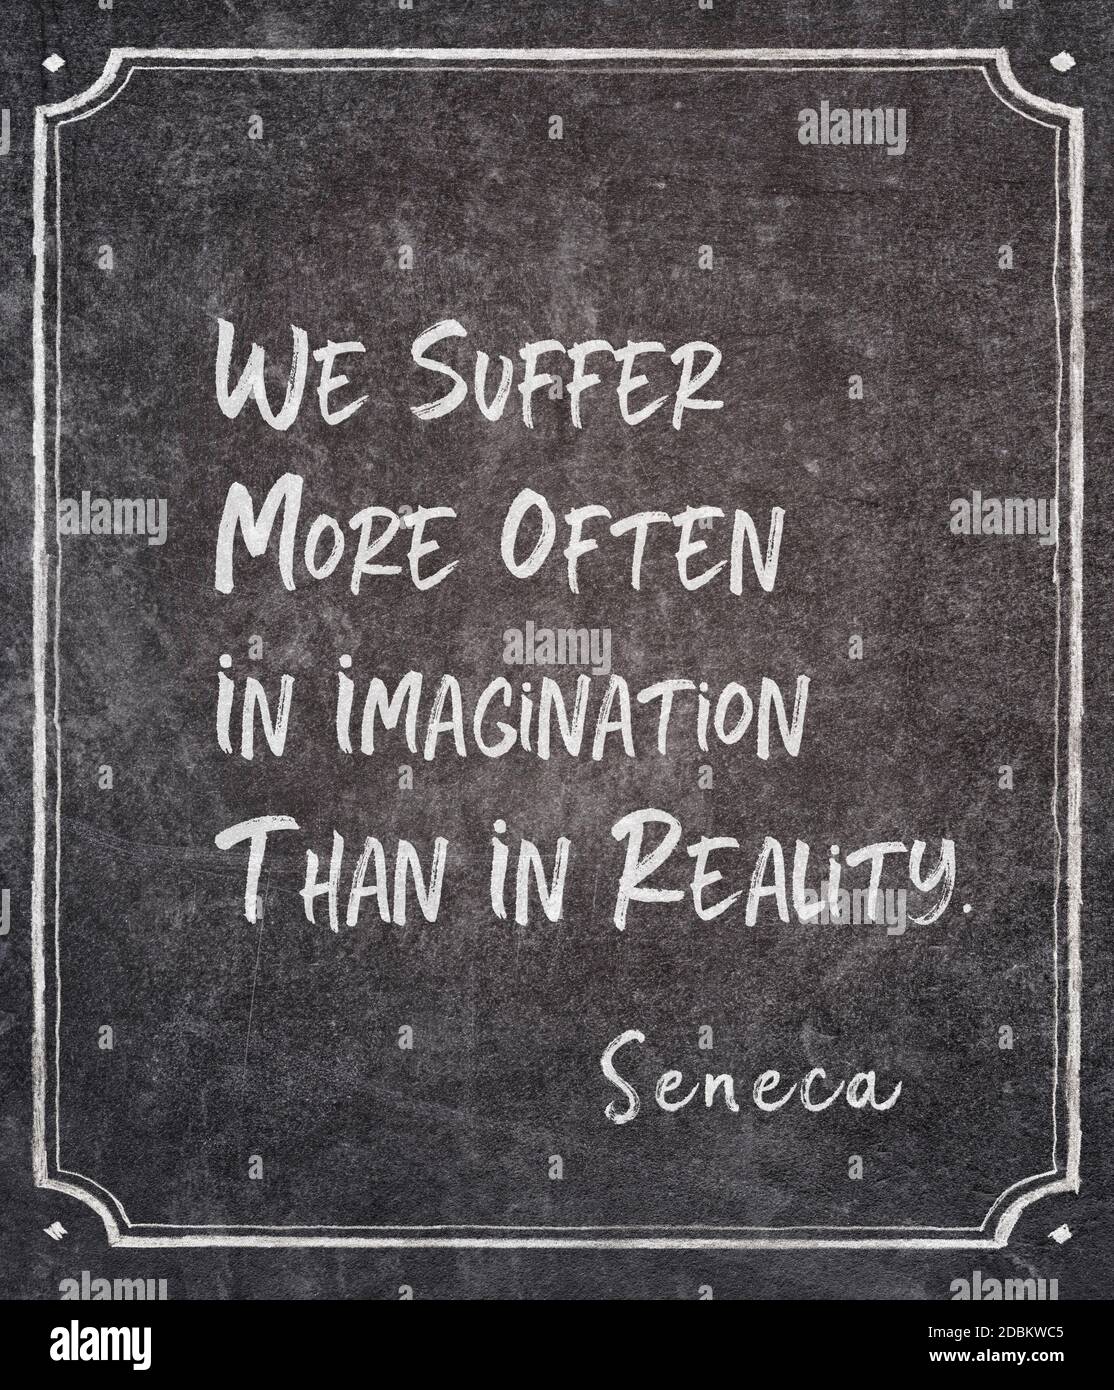 We suffer more often in imagination than in reality - ancient Roman philosopher Seneca quote written on framed chalkboard Stock Photo